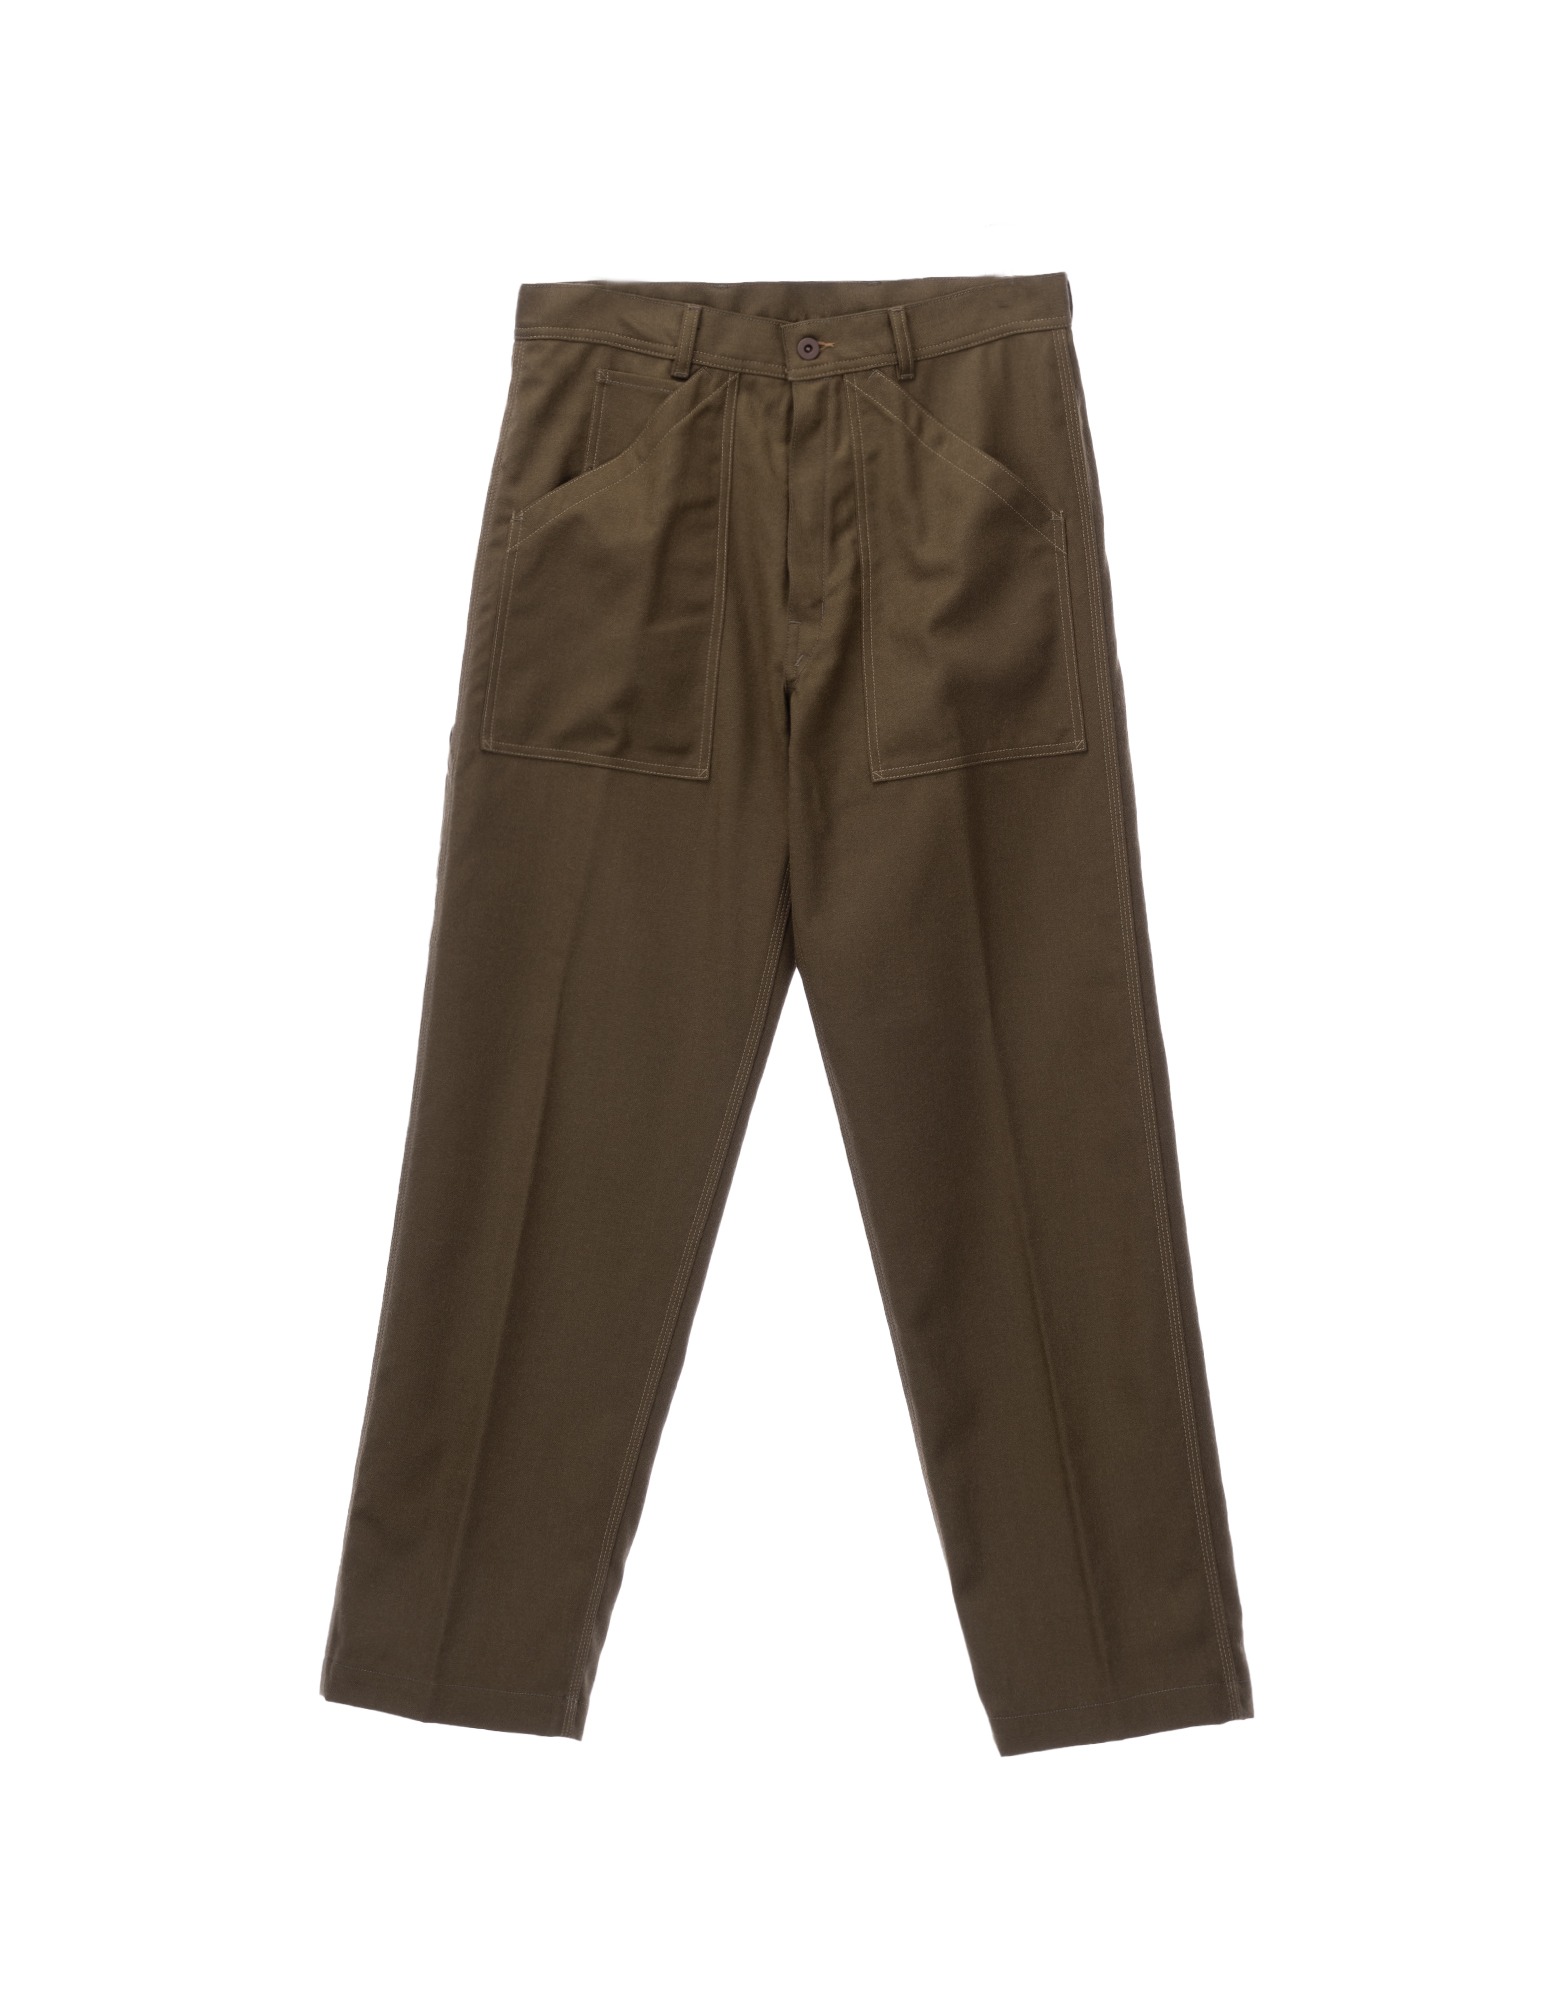 PAUL Rover Wool Twill Trousers (Olive)